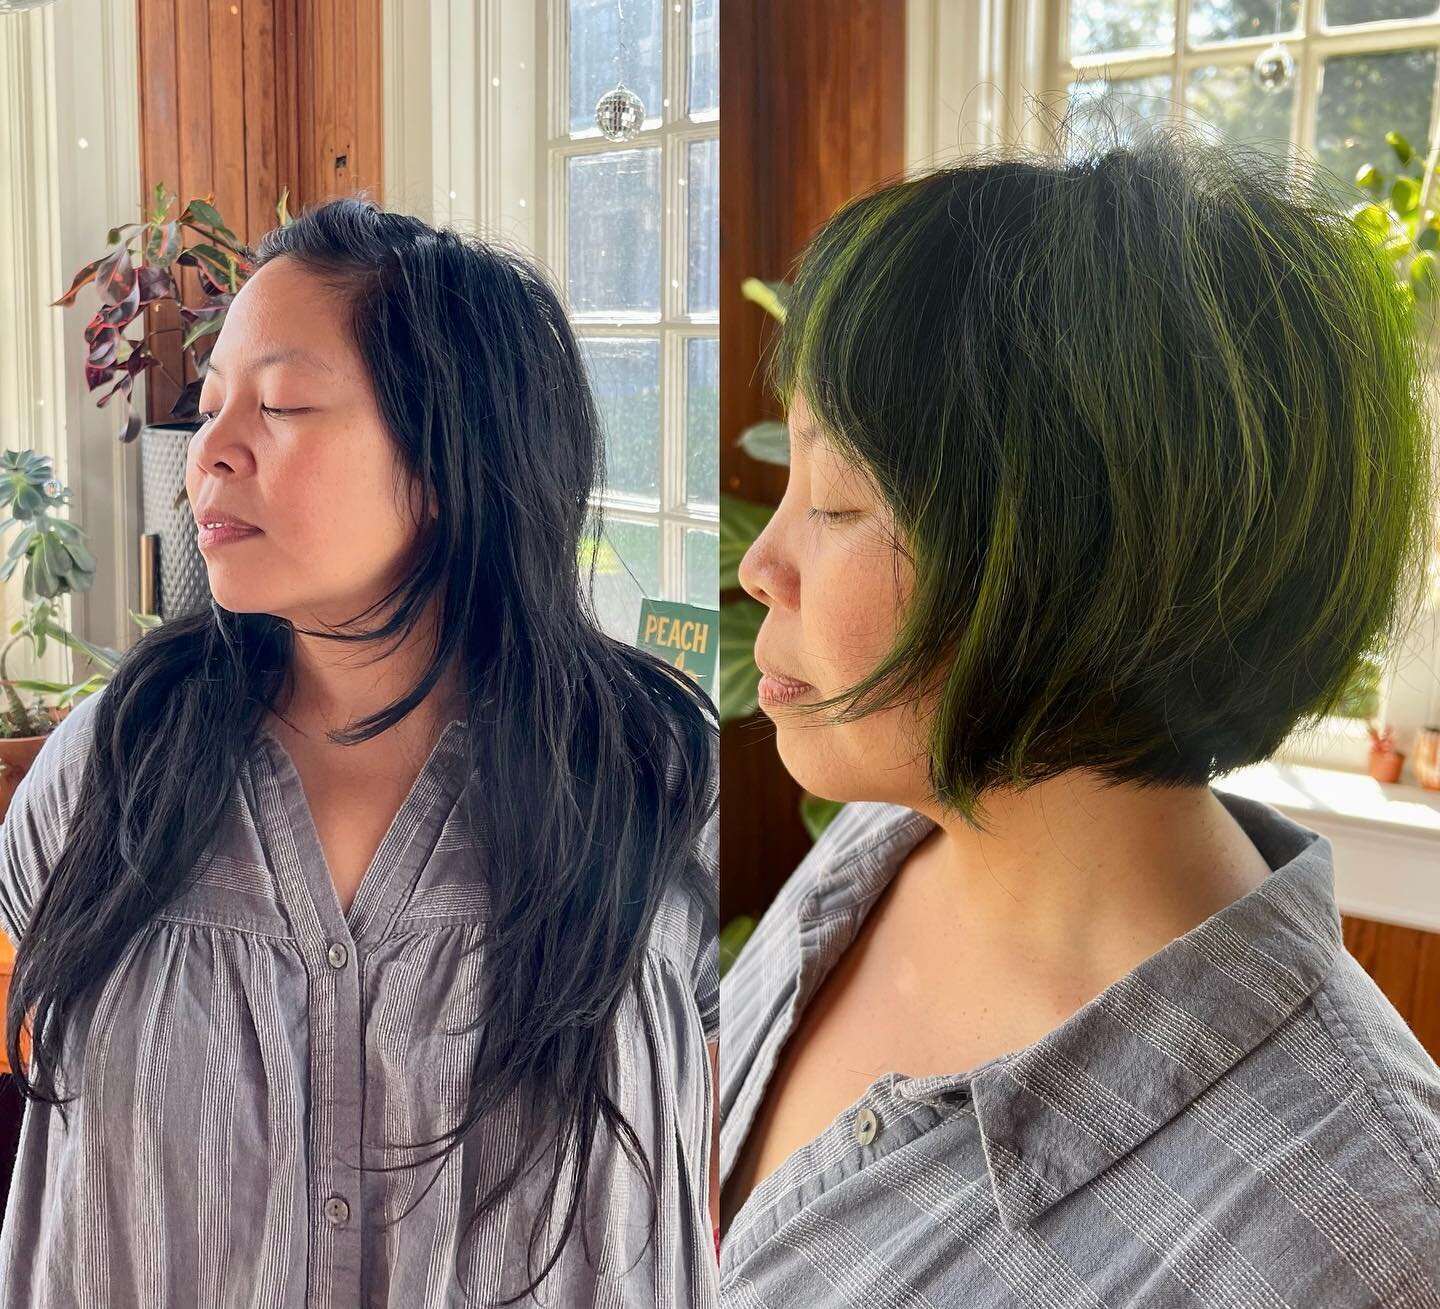 Happy St Patrick&rsquo;s Day, lucky clovers 🍀 @lovemorehair &amp; @katie.c.artistry collaborated on this green goddess to create the most ethereal color and shape combo. We live a good transformation🍀🫶🏼